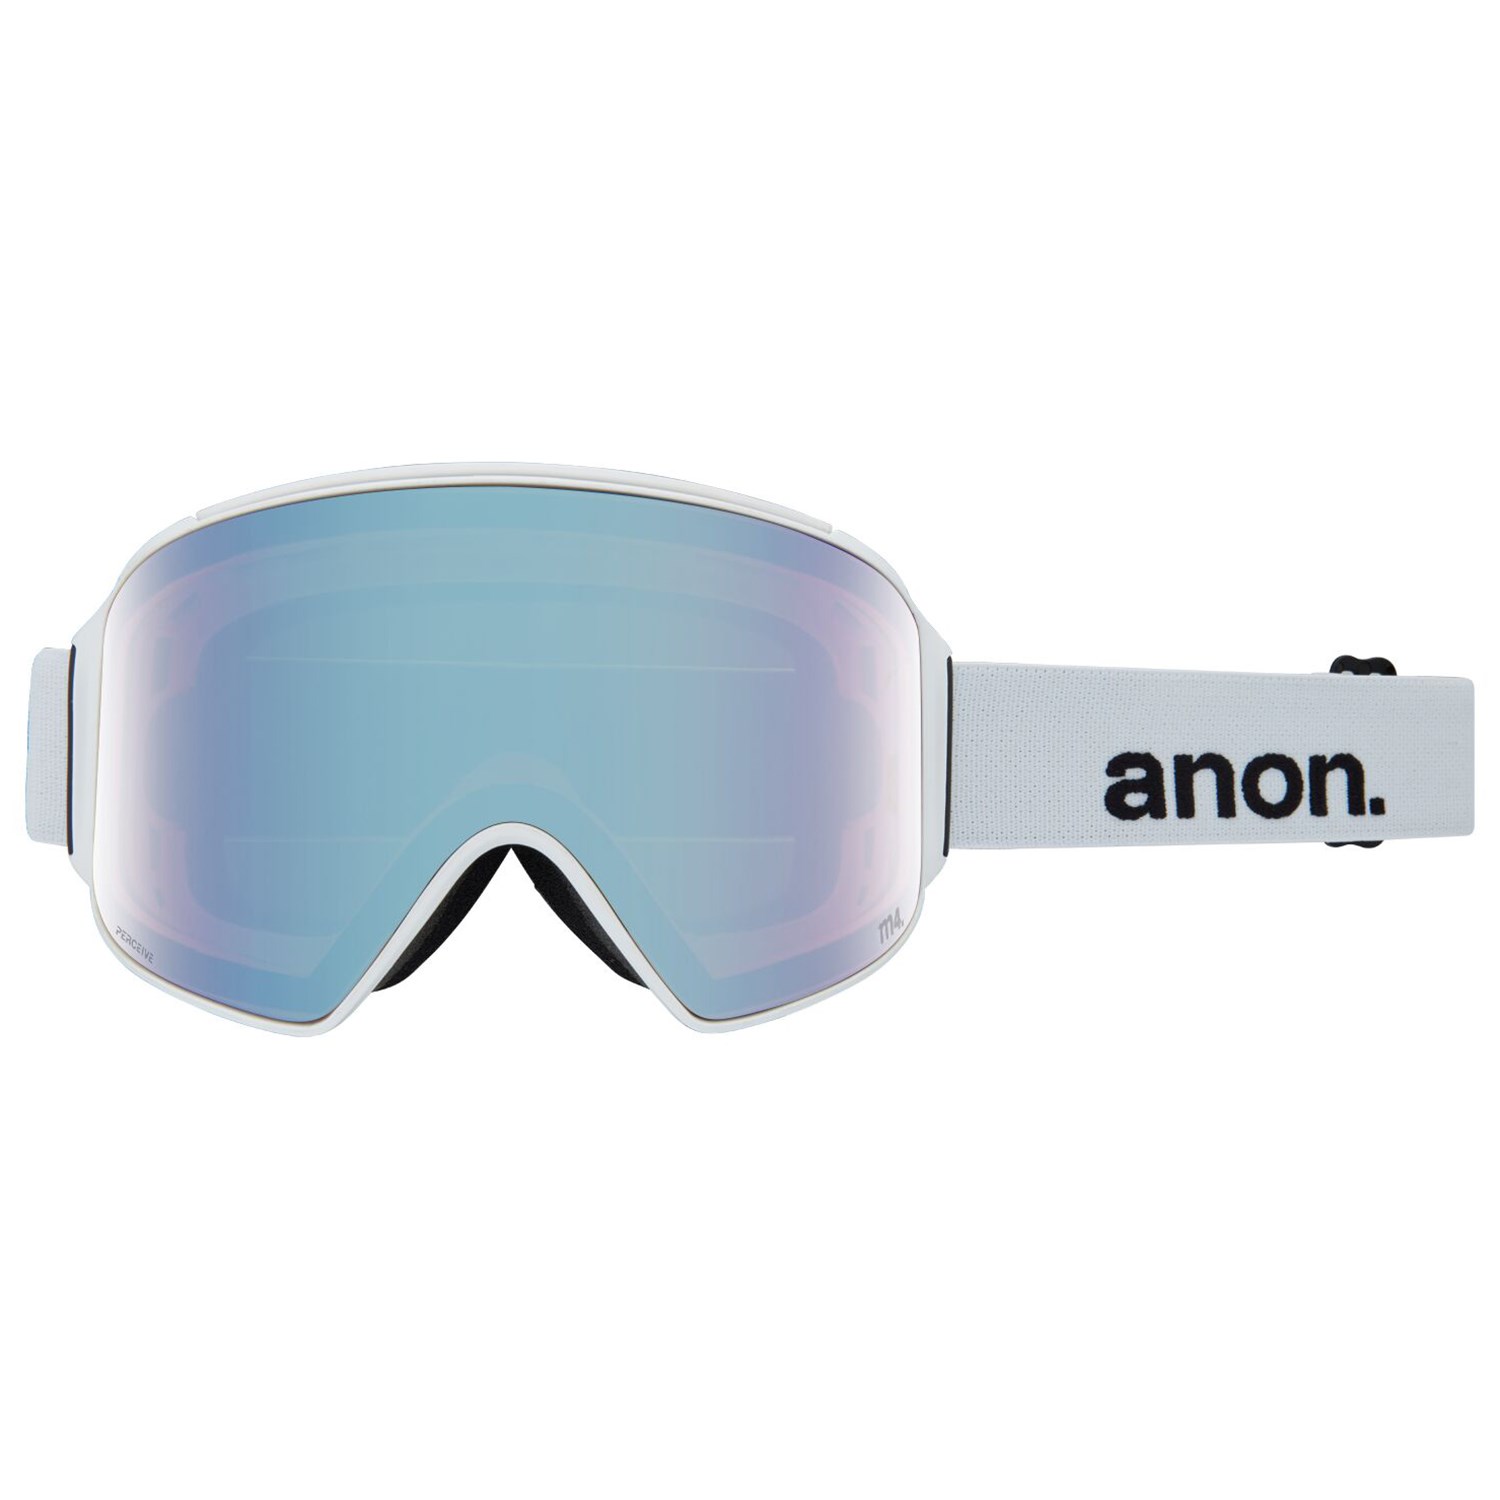 Anon M4 Cylindrical Low Bridge Fit Goggles | evo